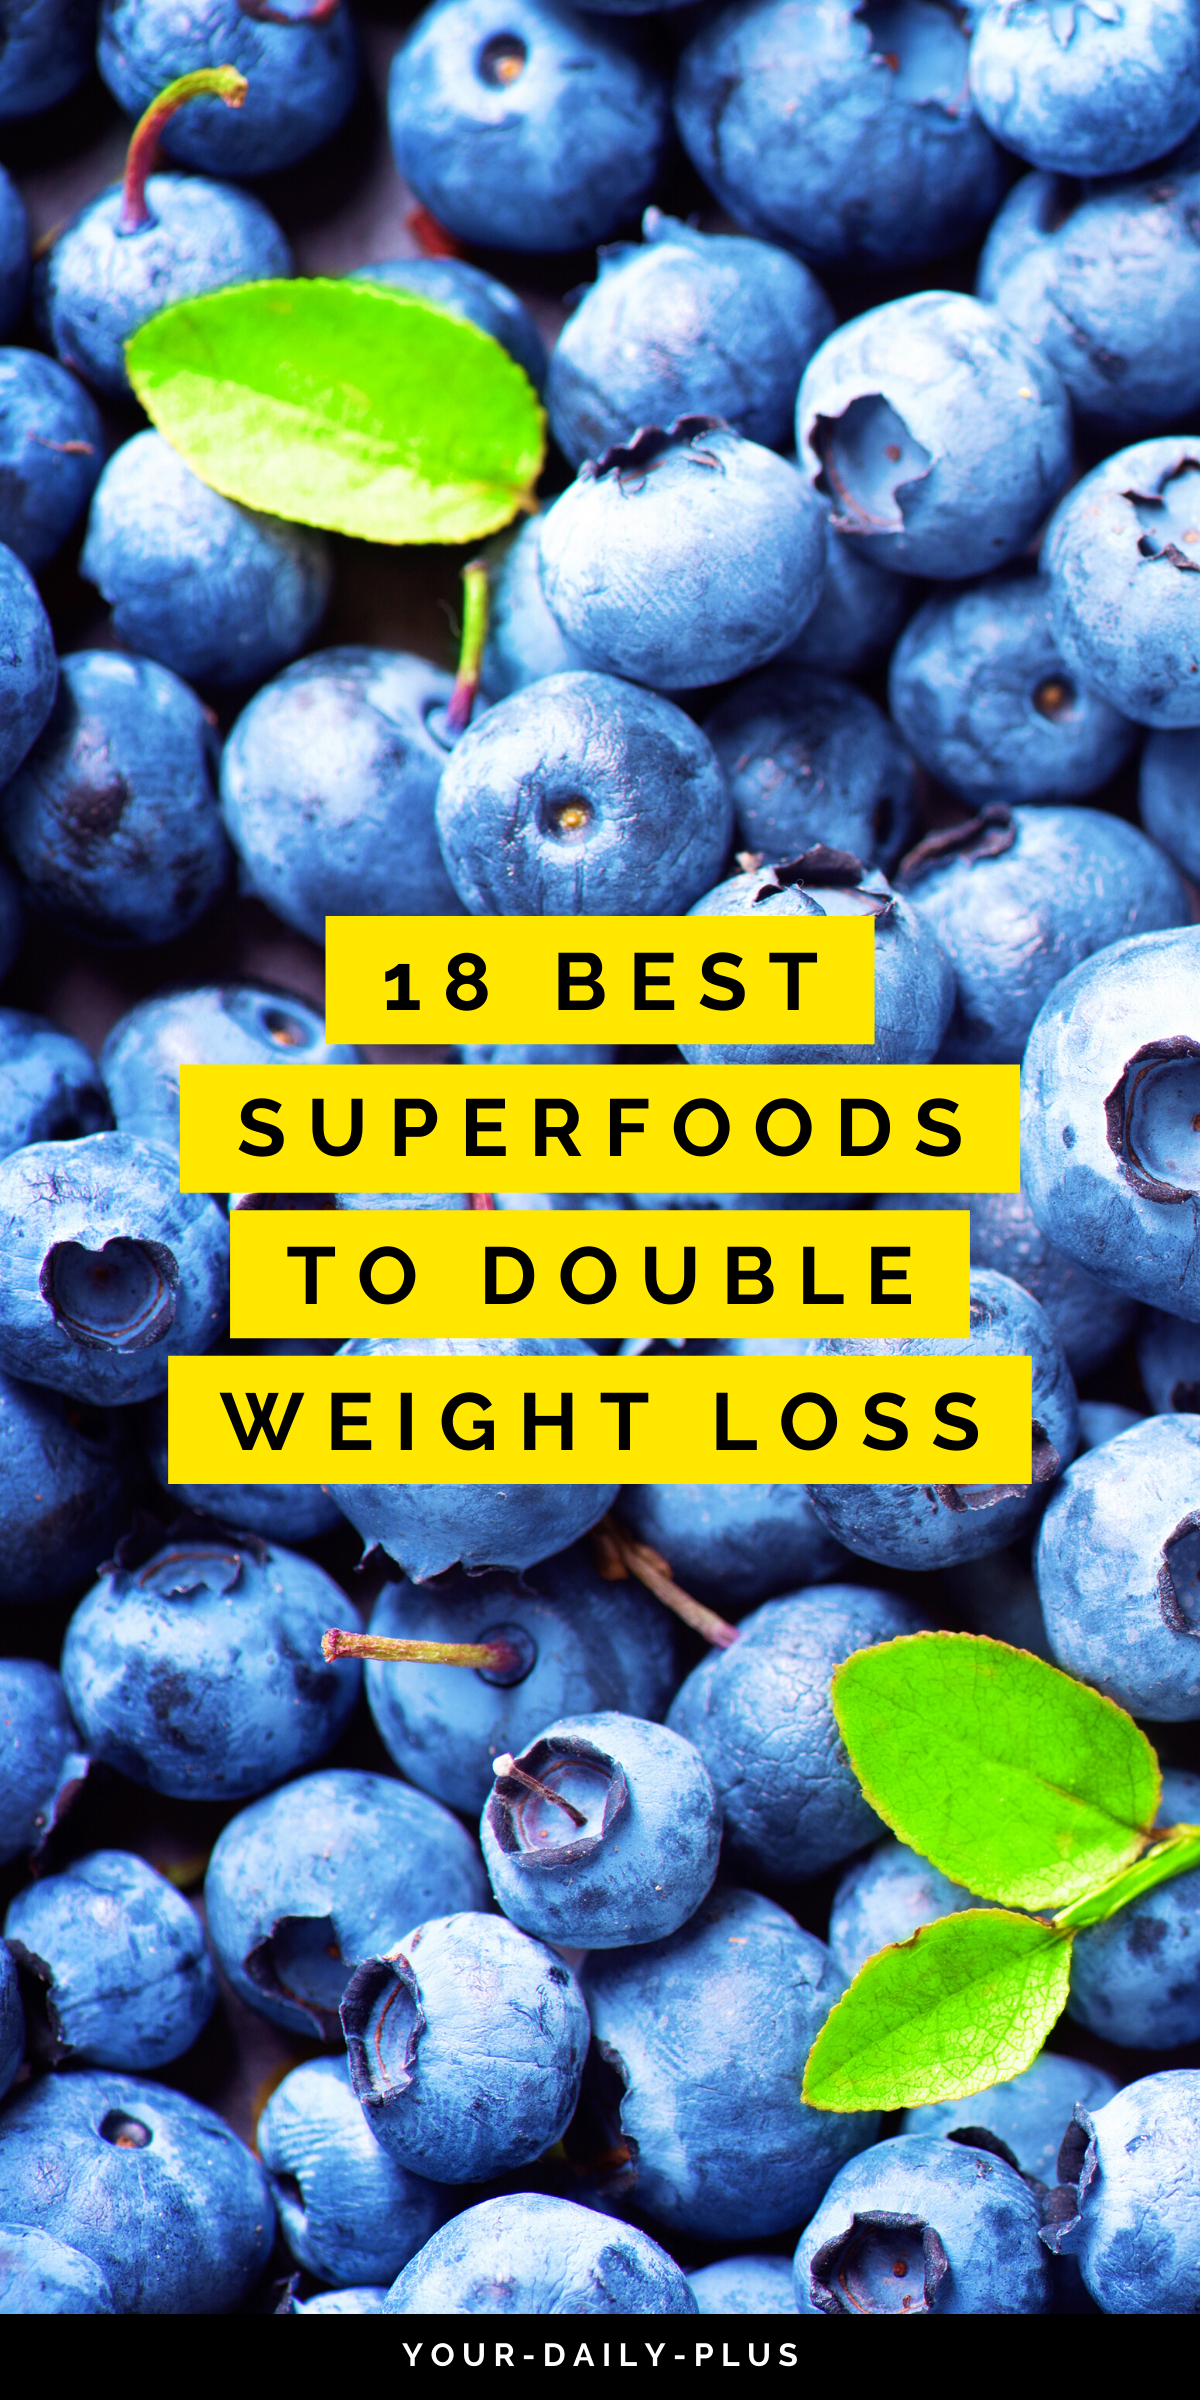 Try to find the best ways to lose weight? Eating these metabolism-boosting superfoods will help you naturally burn crazy amounts of fat. #superfood #diet #healthysnacks